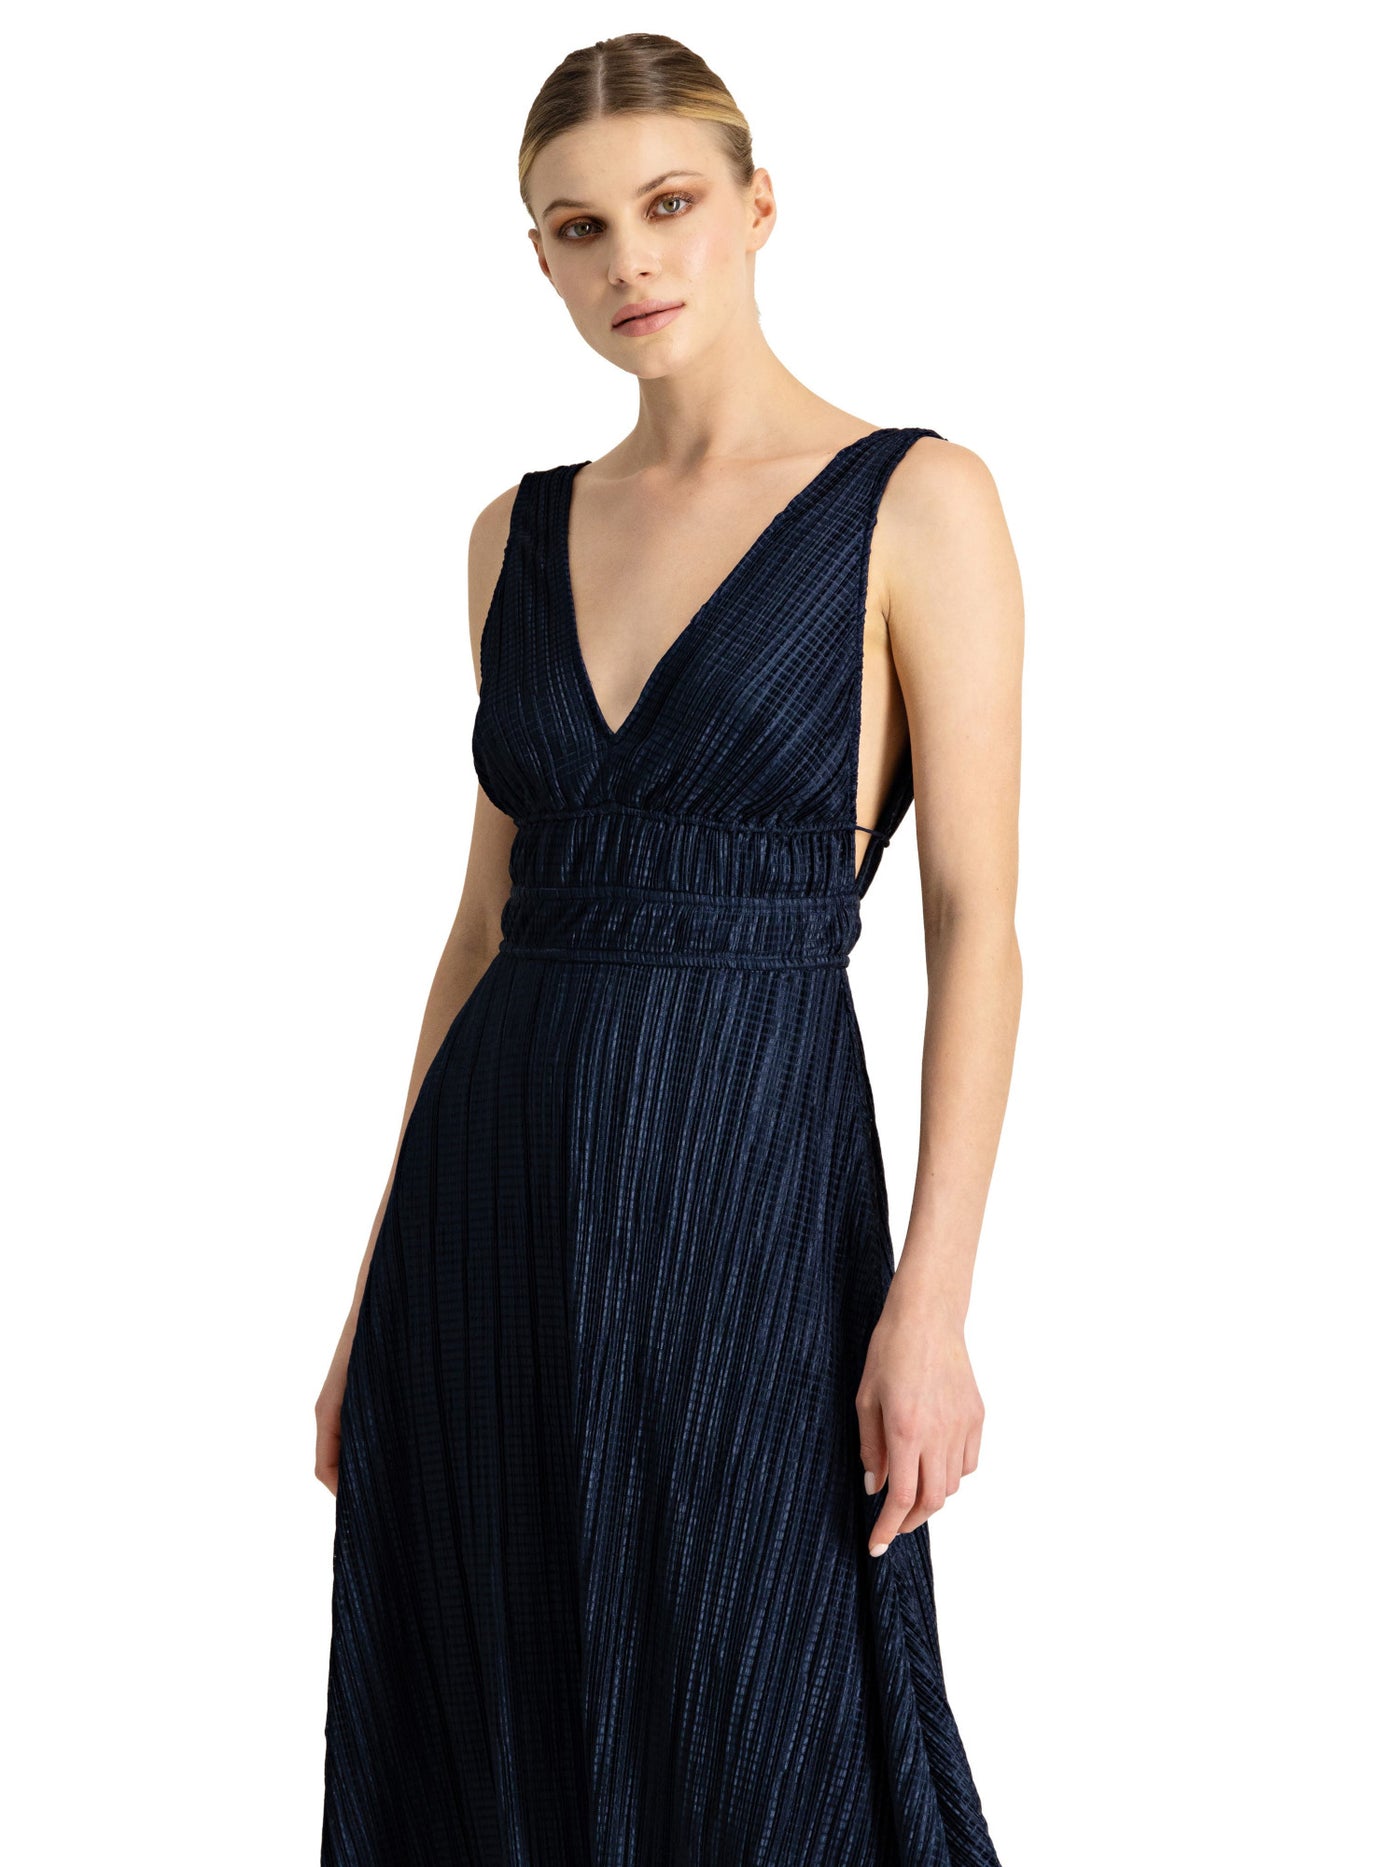 ML MONIQUE LHUILLIER Womens Navy Textured Zippered Tie V-back Lined Sleeveless V Neck Midi Cocktail Fit + Flare Dress 10